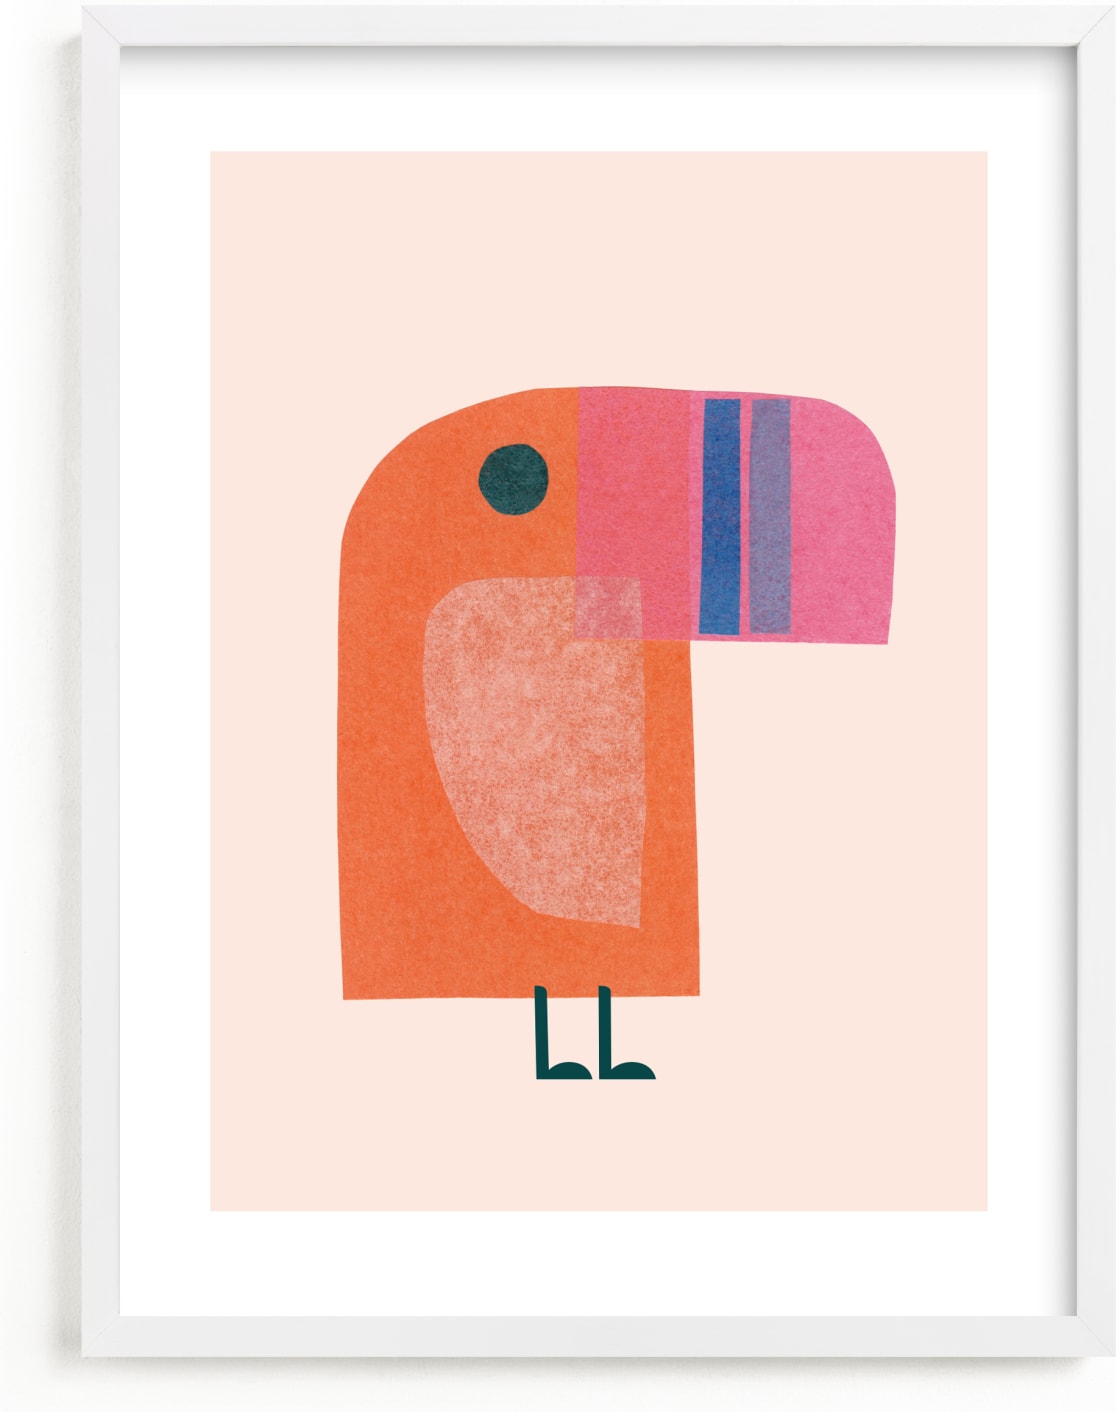 This is a pink, orange art by Carrie Moradi called mod toucan.